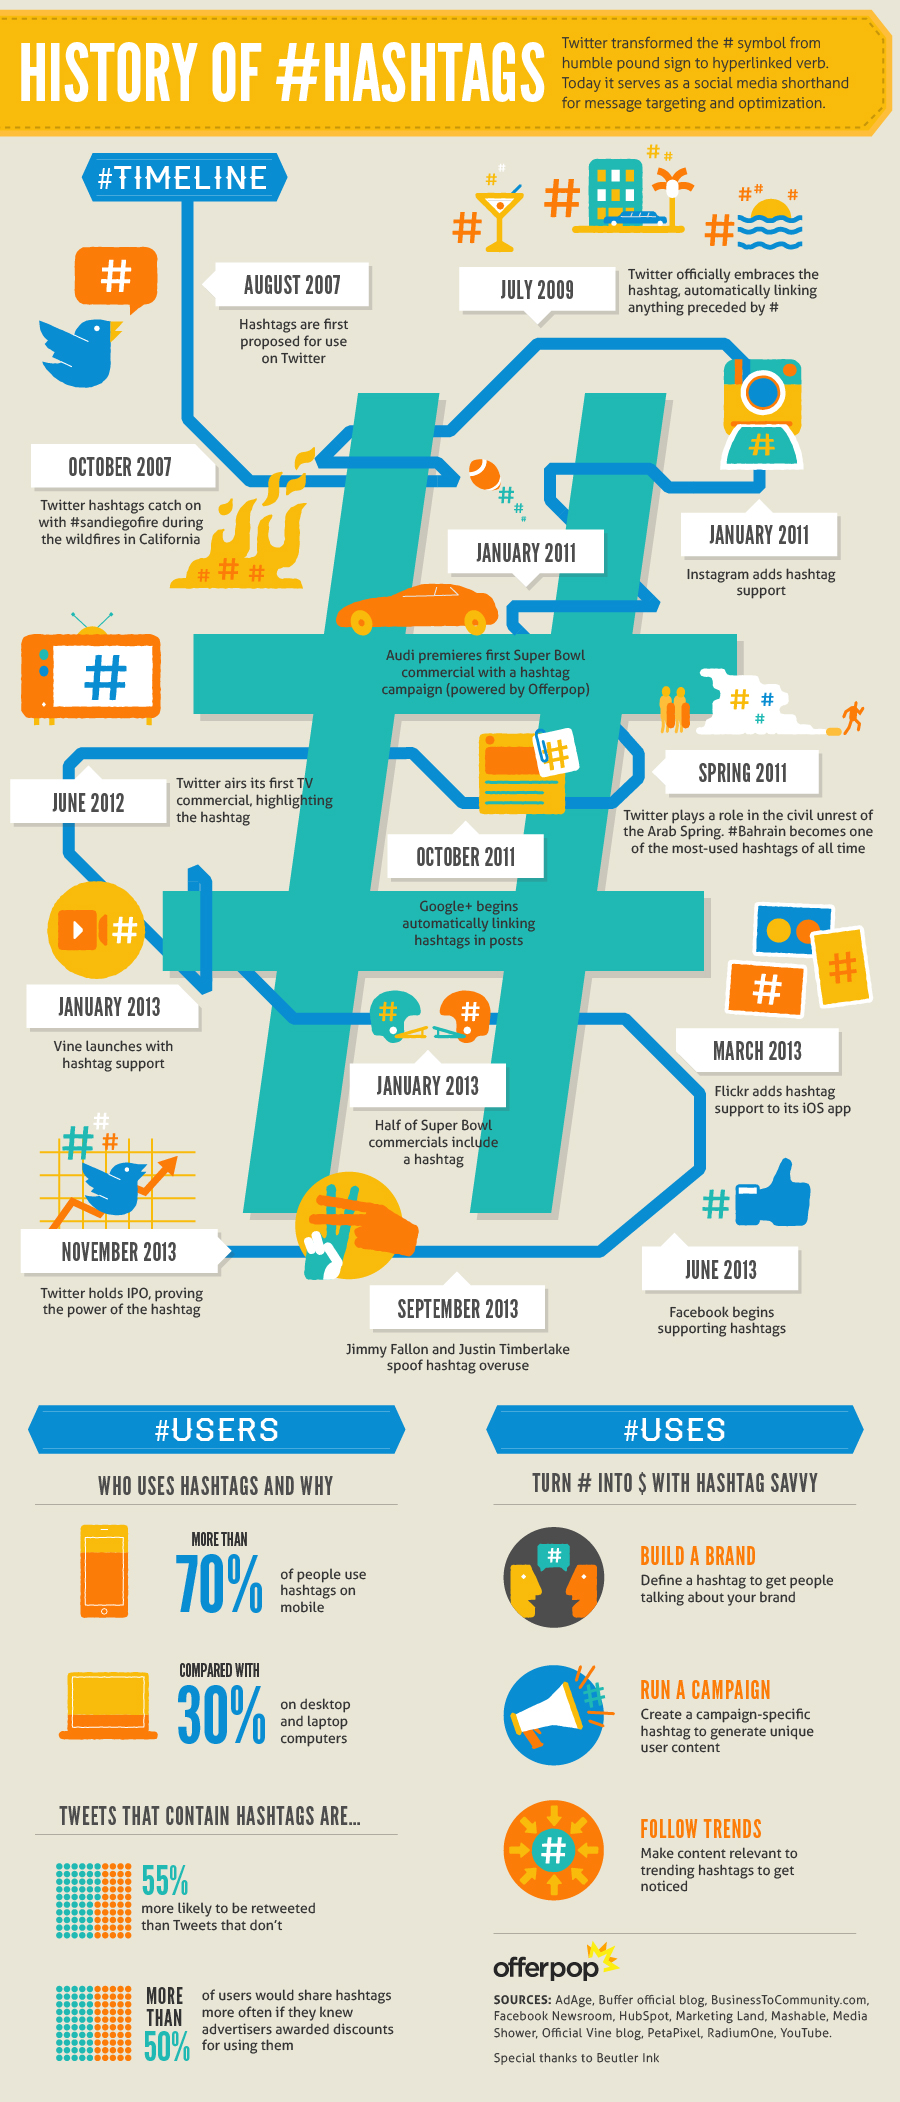 history of hashtag infographic - 7 Tactics to use Hashtag to Grow Your Business